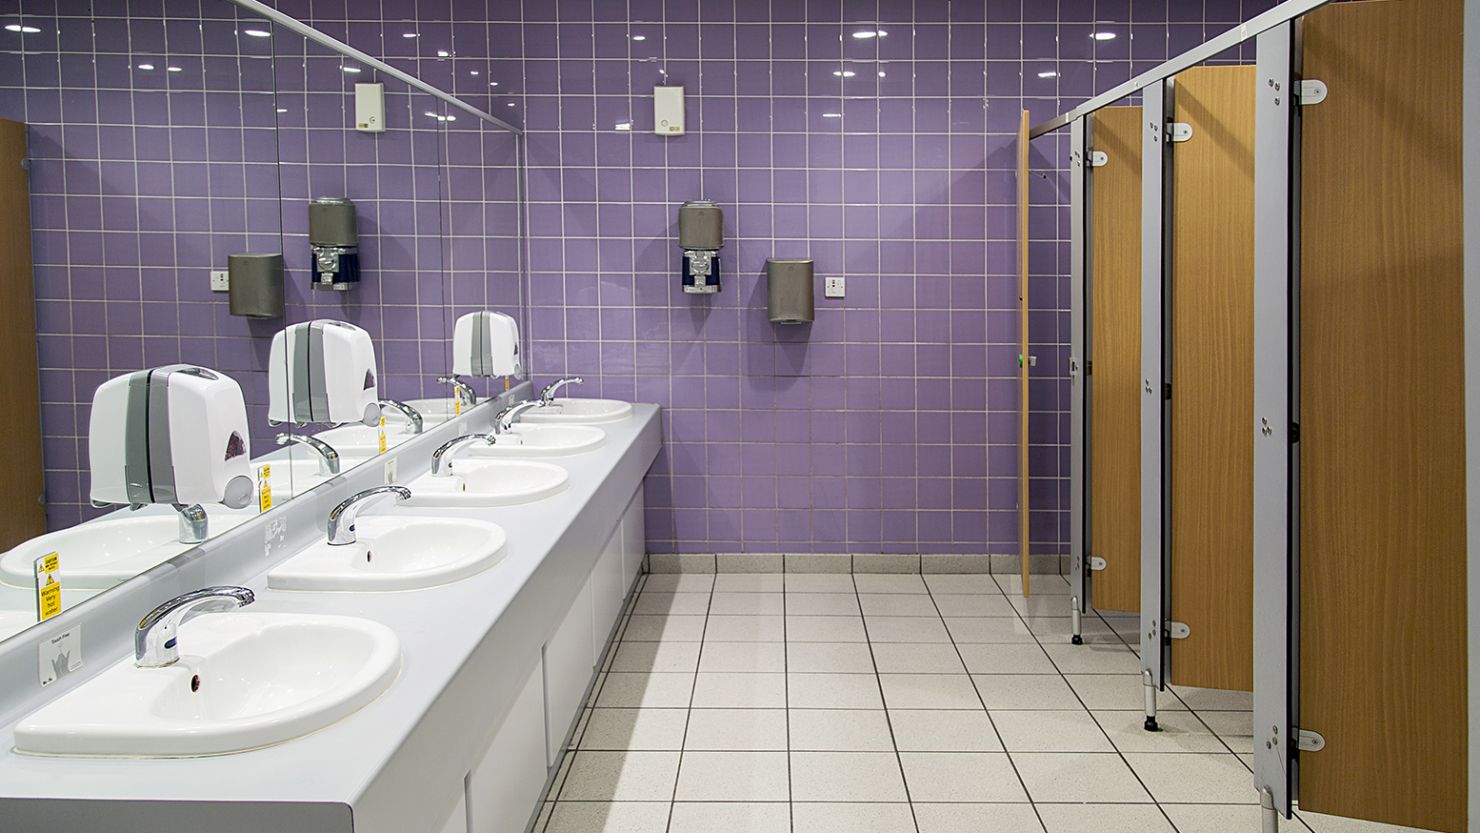 Public restrooms: What you need to know about using them safely amid the  pandemic